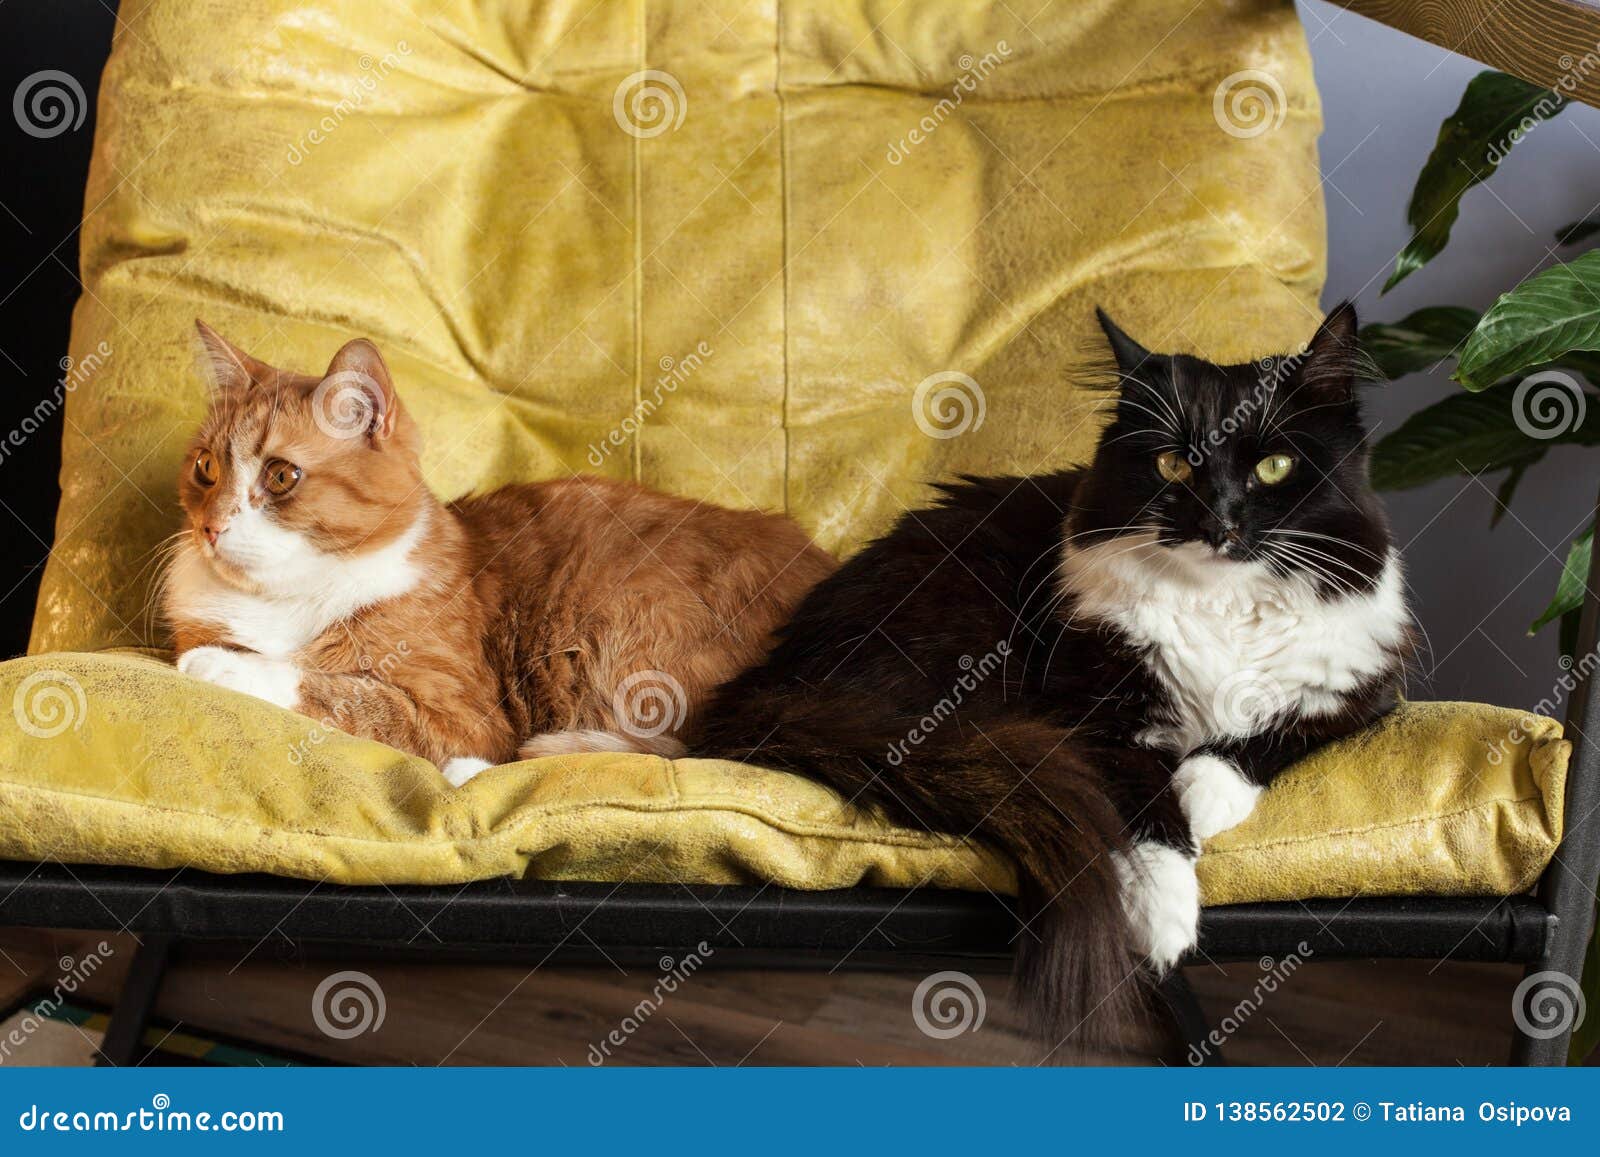 Two Domestic Cats in a Yellow Chair are Turned Away from Each Other ...